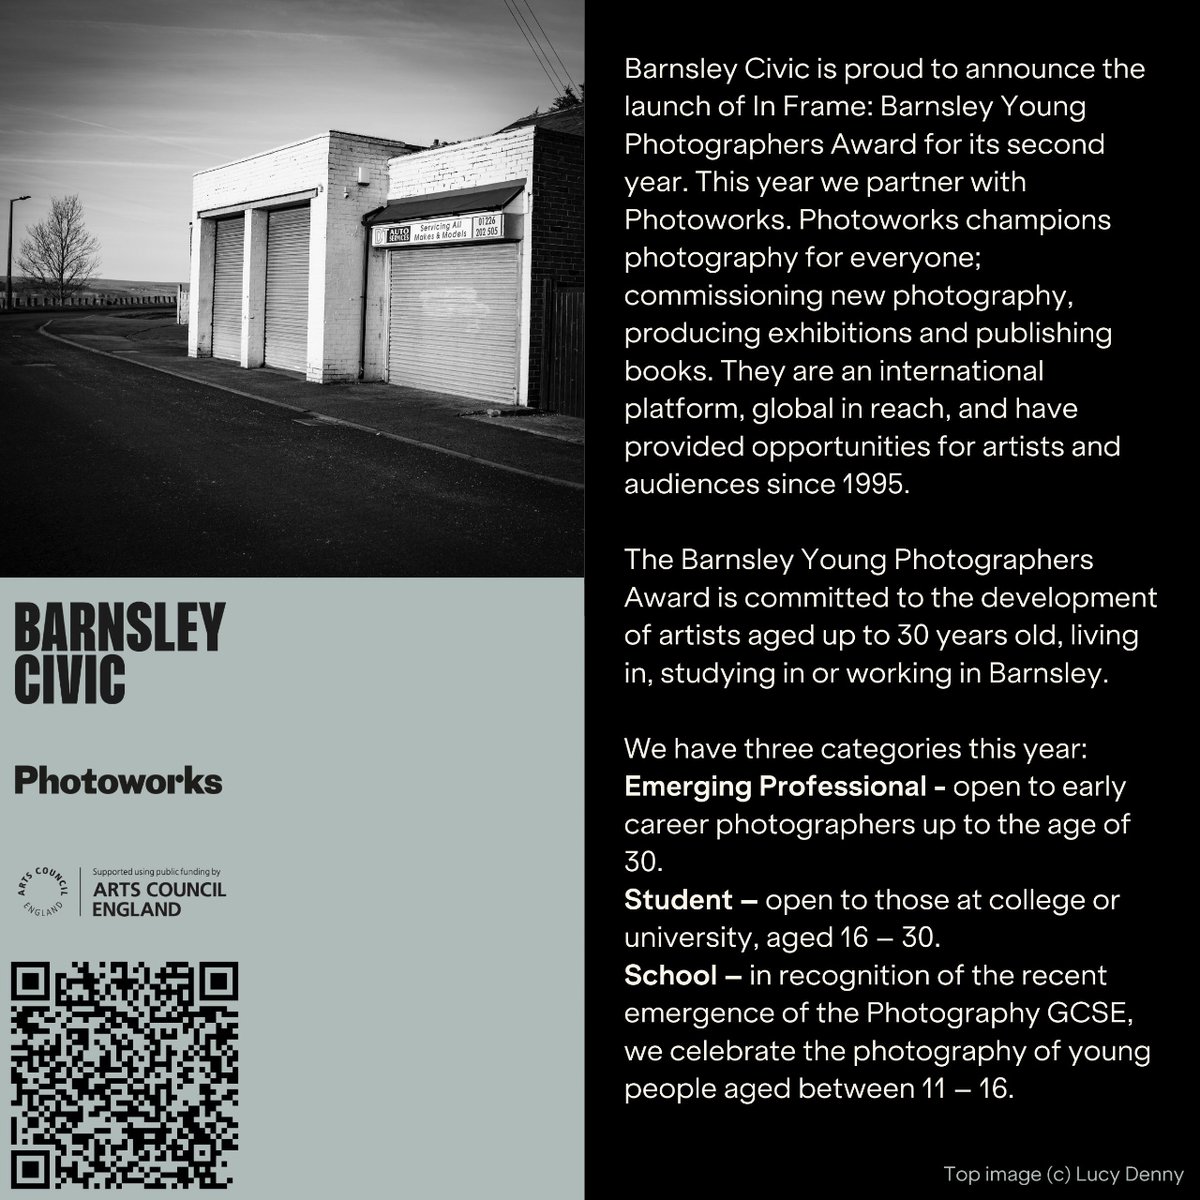 We are proud to announce, In Frame: Barnsley Young Photographers Award for its second year.  This year we partner with @photoworks_uk who champion photography for everyone. For more info visit rb.gy/38pq6j.